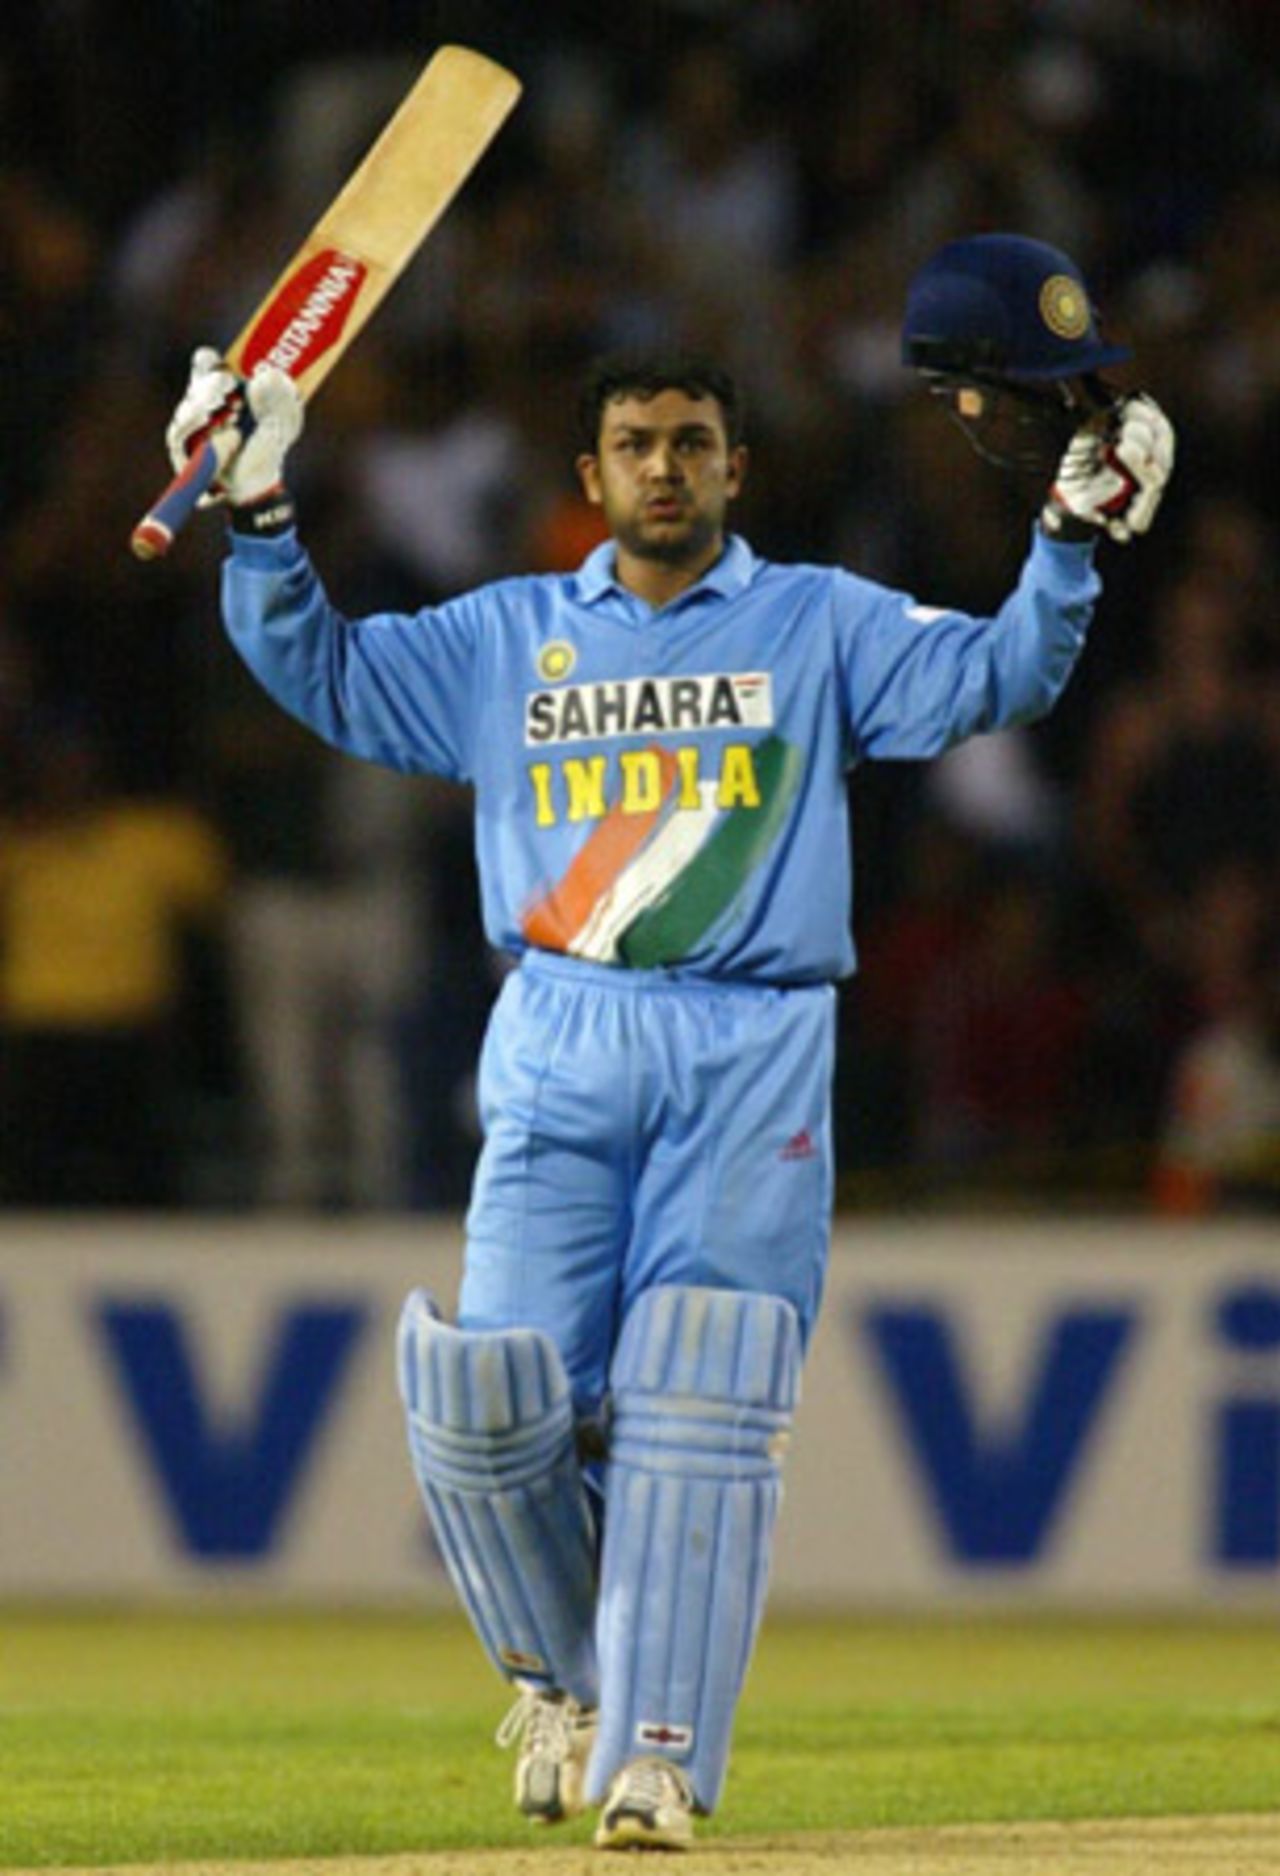 Indian batsman Virender Sehwag raises his bat and helmet to celebrate reaching his century. Sehwag went on to score 112. 6th ODI: New Zealand v India at Eden Park, Auckland, 11 January 2003.